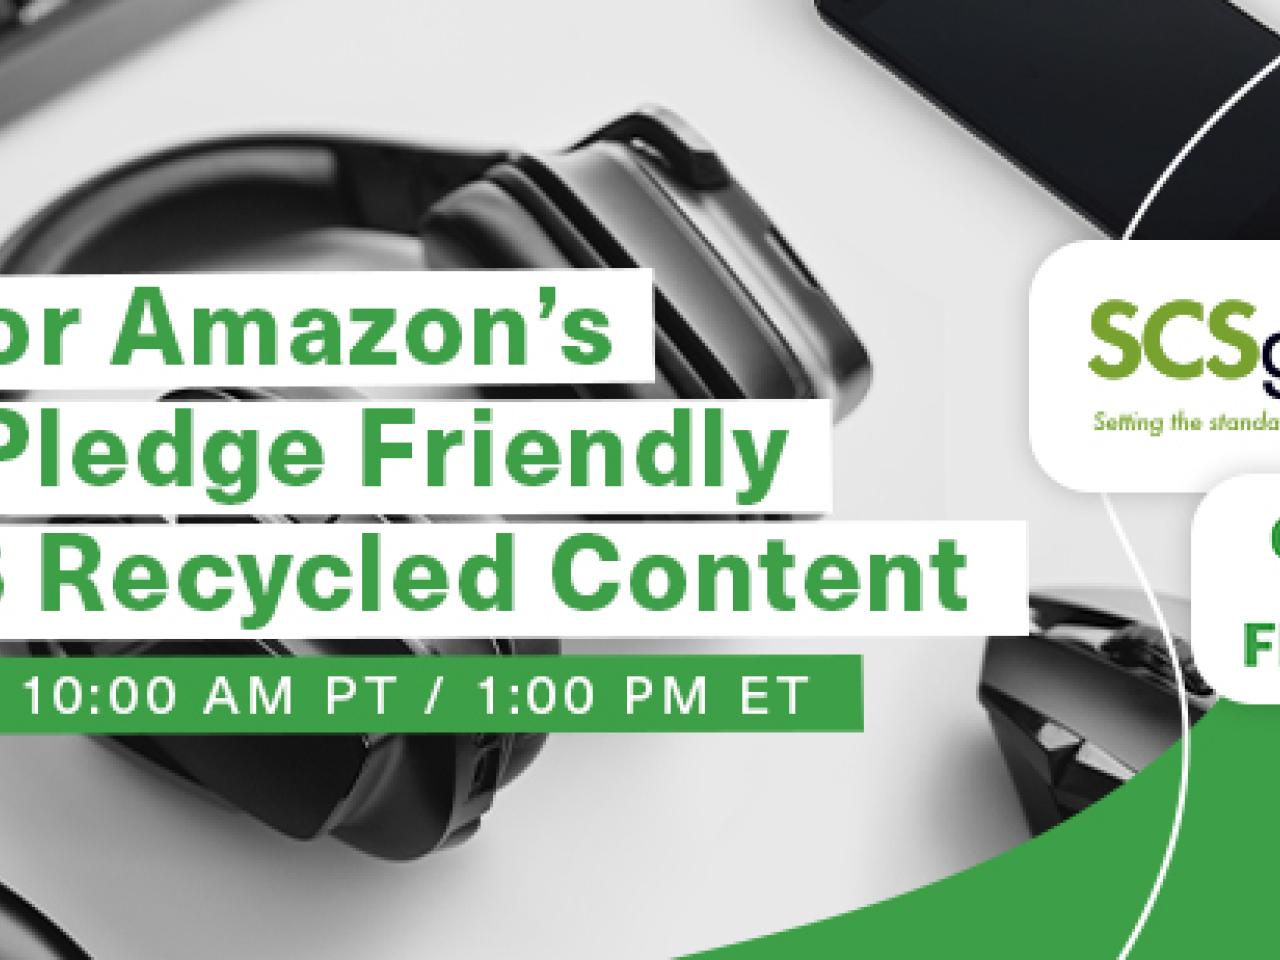 Webinar: Qualify for Amazon's Climate Pledge Friendly with SCS Recycled Content Certification for Electrical & Electronic Equipment